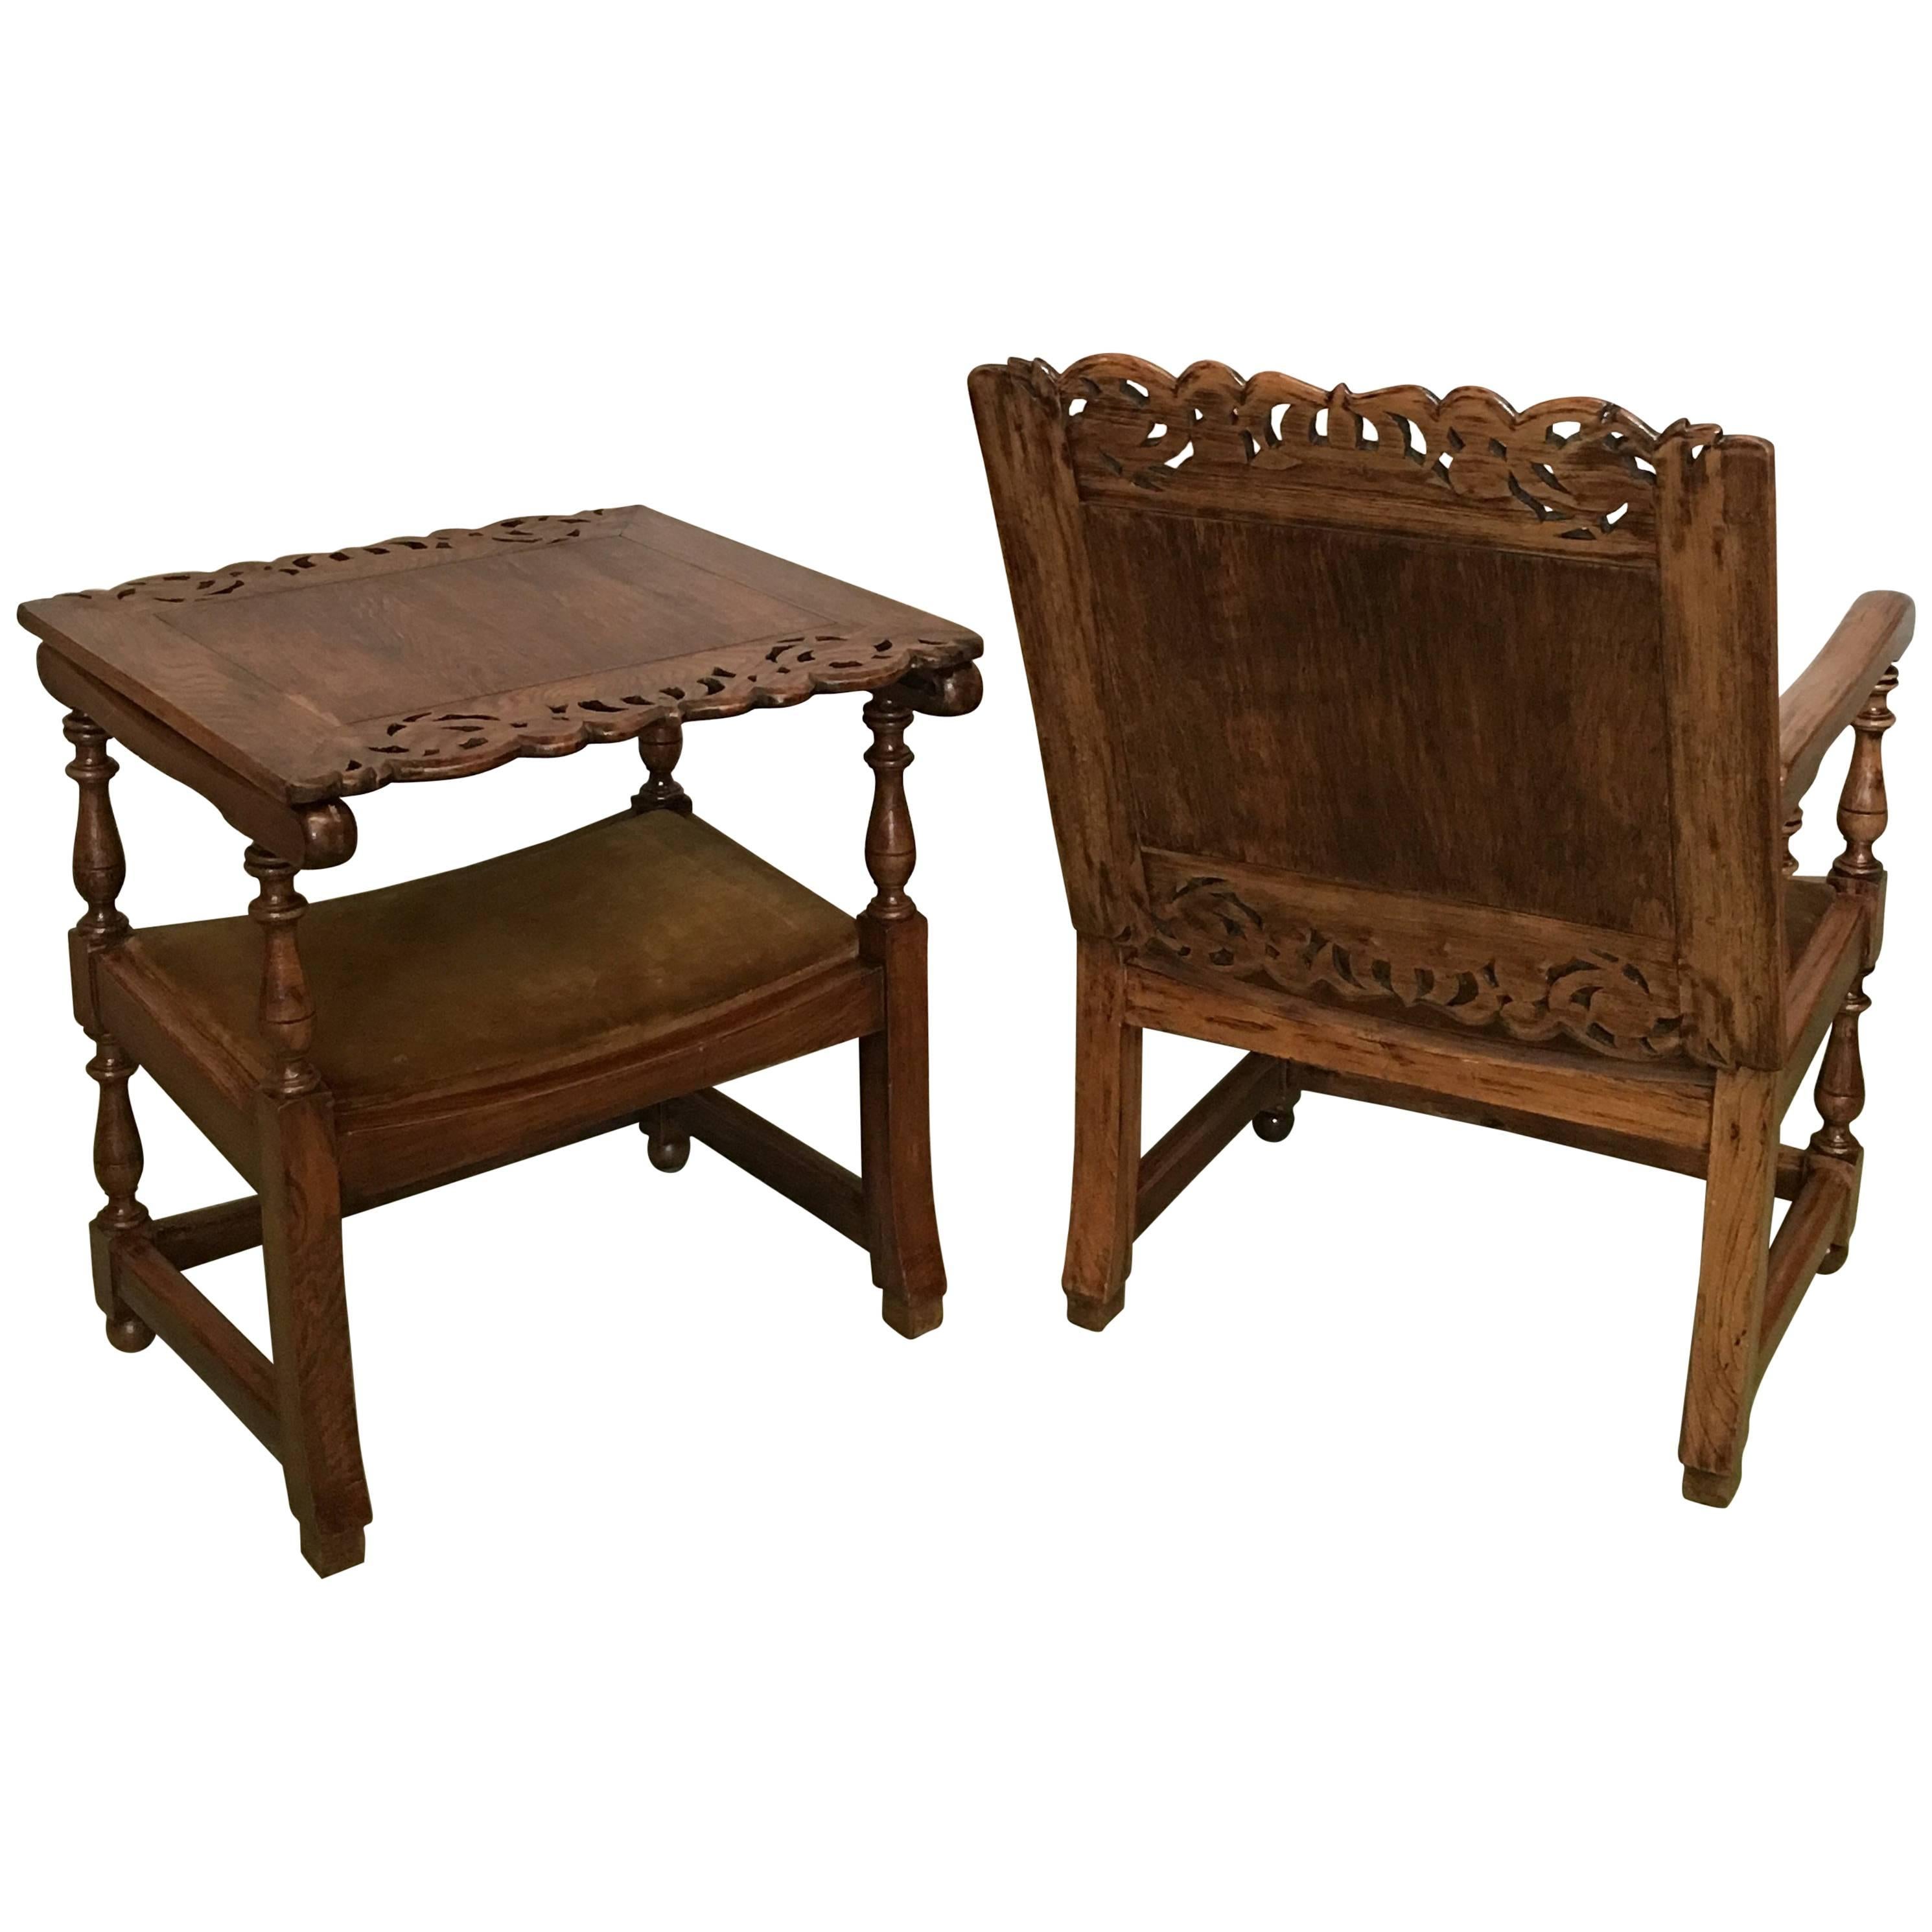 19th Century Convertible Monk's Chair or End Table. Walnut foldable Armchair